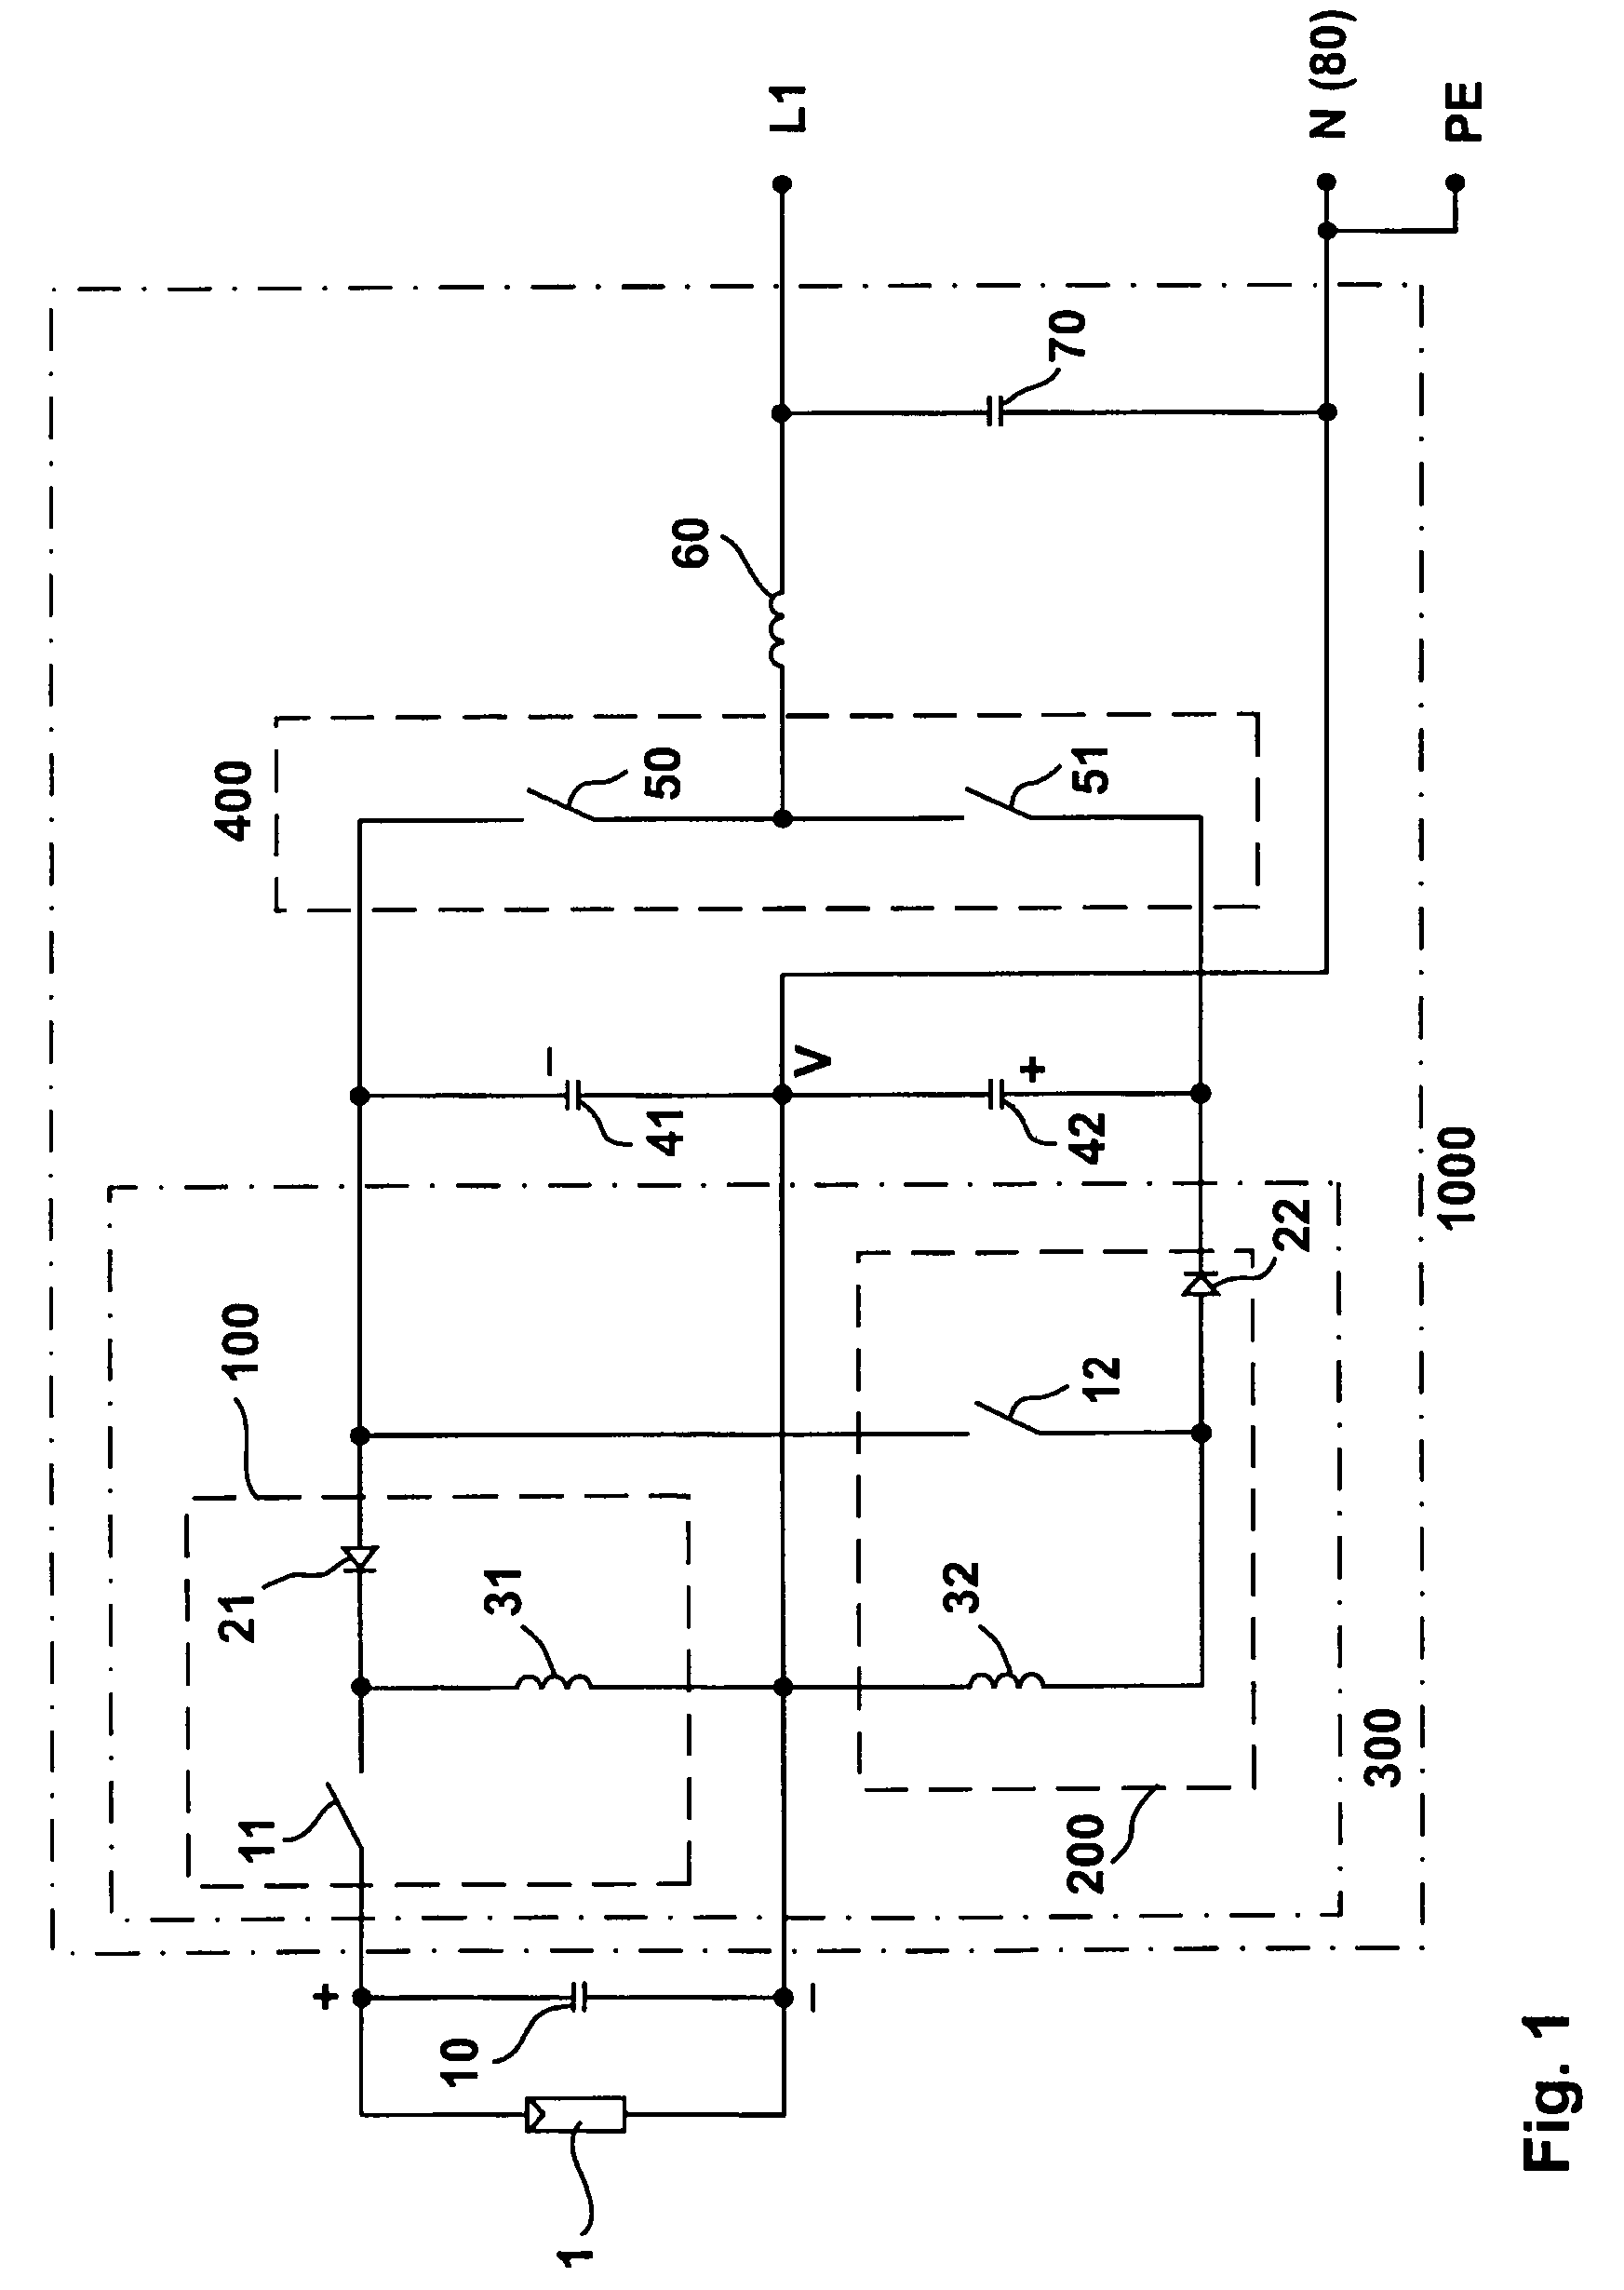 Circuit apparatus for transformerless conversion of an electric direct voltage into an alternating voltage